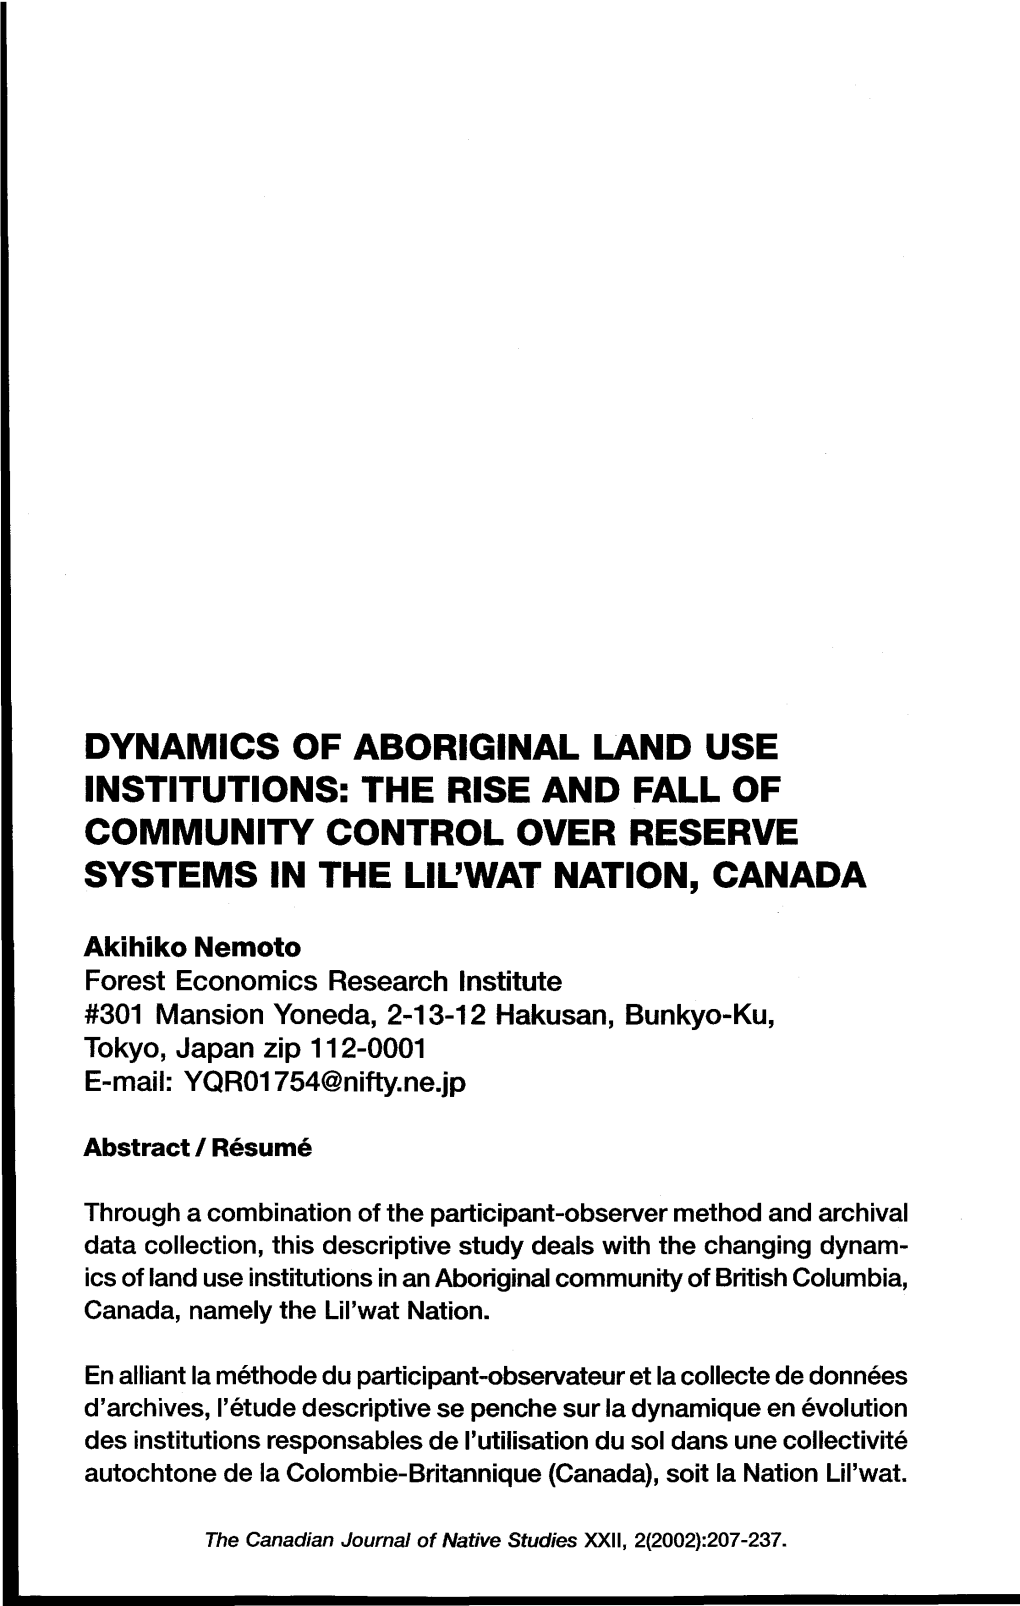 Dynamics of Aboriginal Land Use Institutions: the Rise and Fall of Community Control Over Reserve Systems in the Lil'wat Nation, Canada